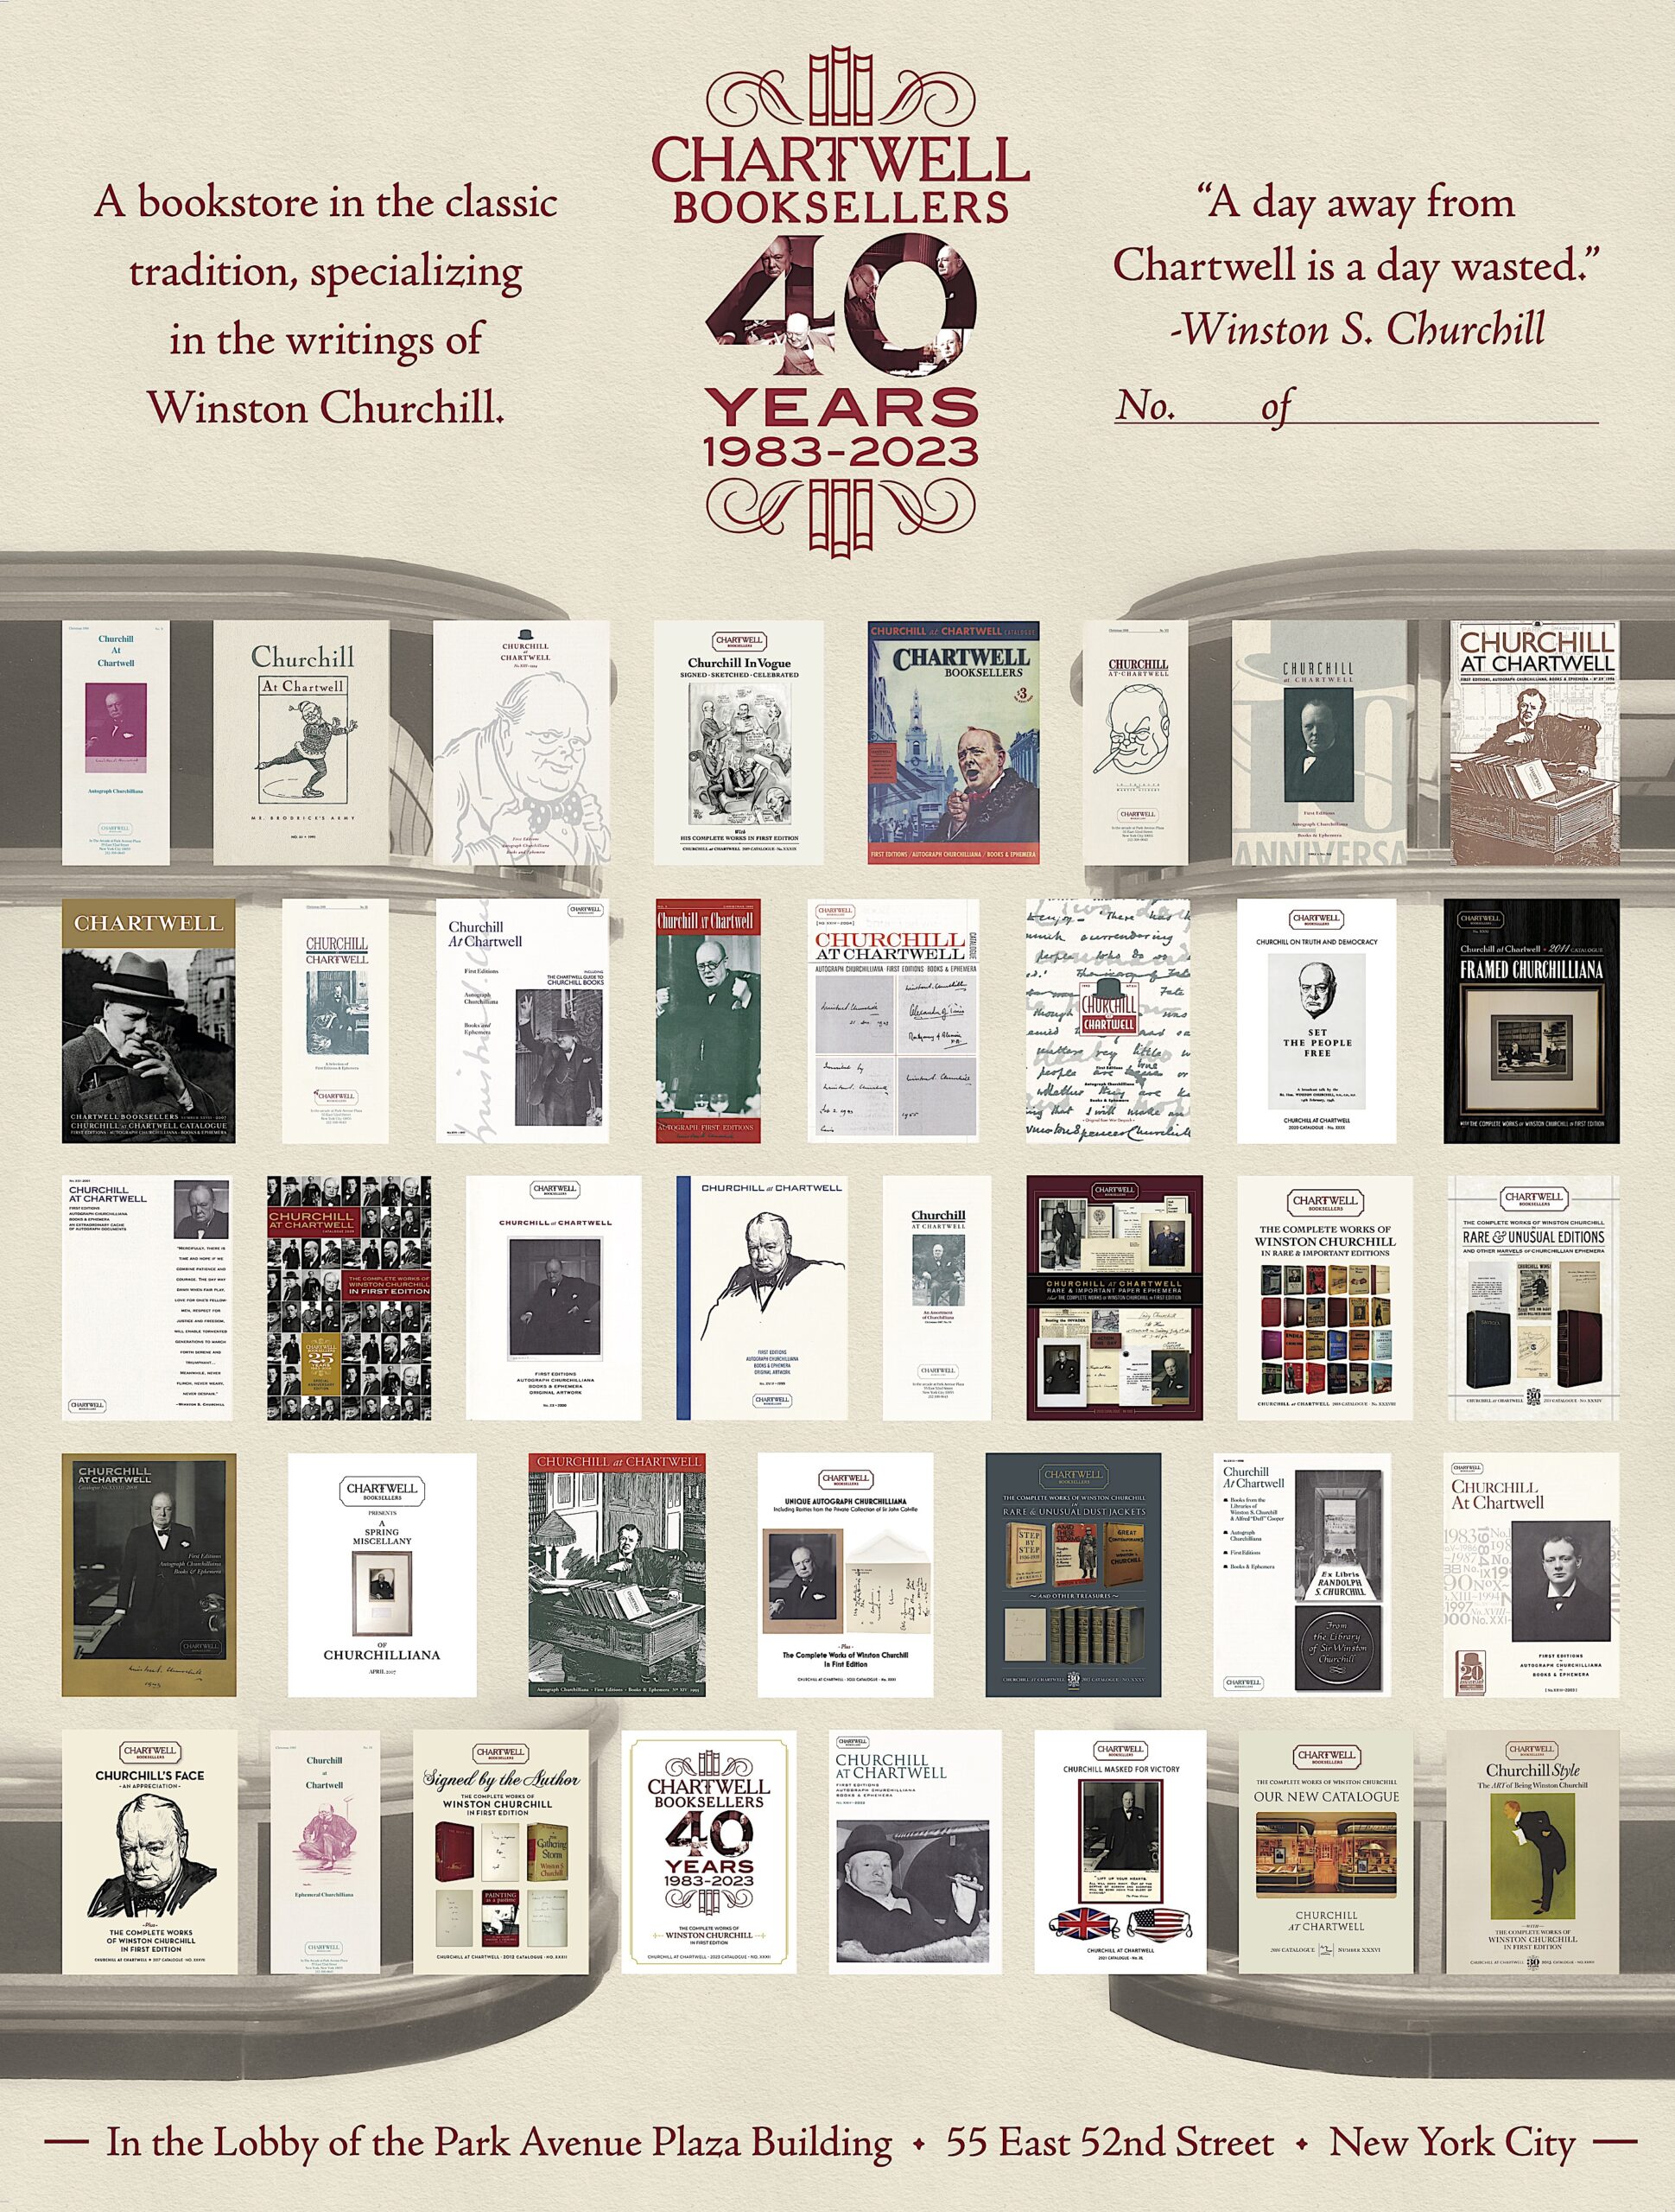 OUR 40TH ANNIVERSARY LIMITED EDITION COMMEMORATIVE POSTER IS HERE!